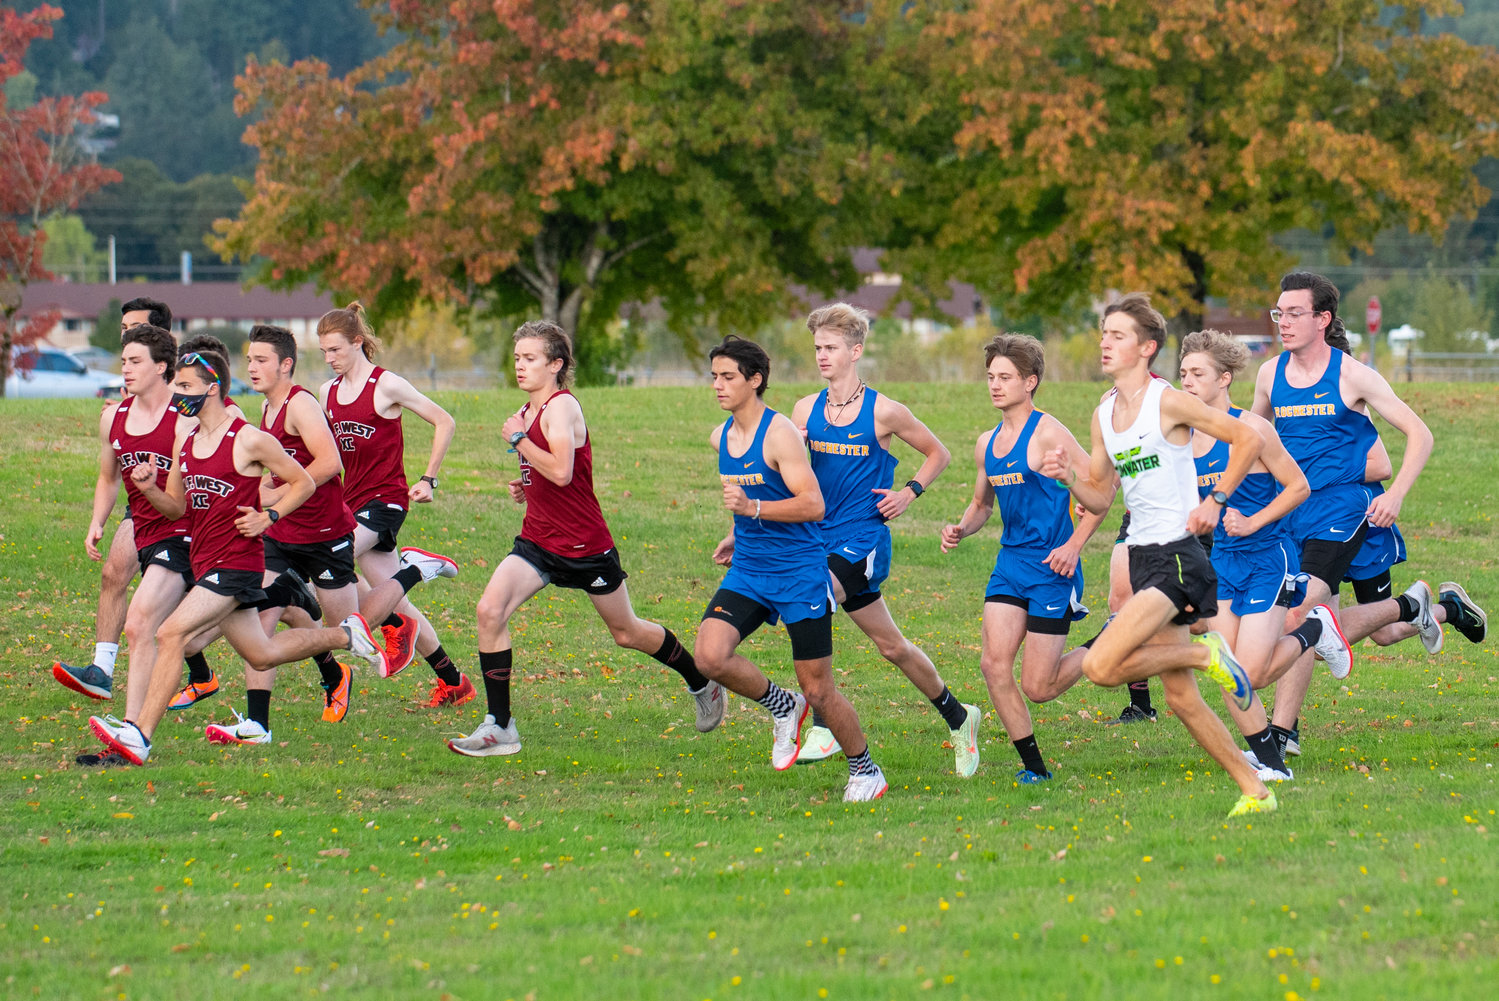 Runners from W.F. West, Rochester and Tumwater take off from the starting line at a meet in Stan Hedwall Park on Wednesday, Oct. 6, 2021.